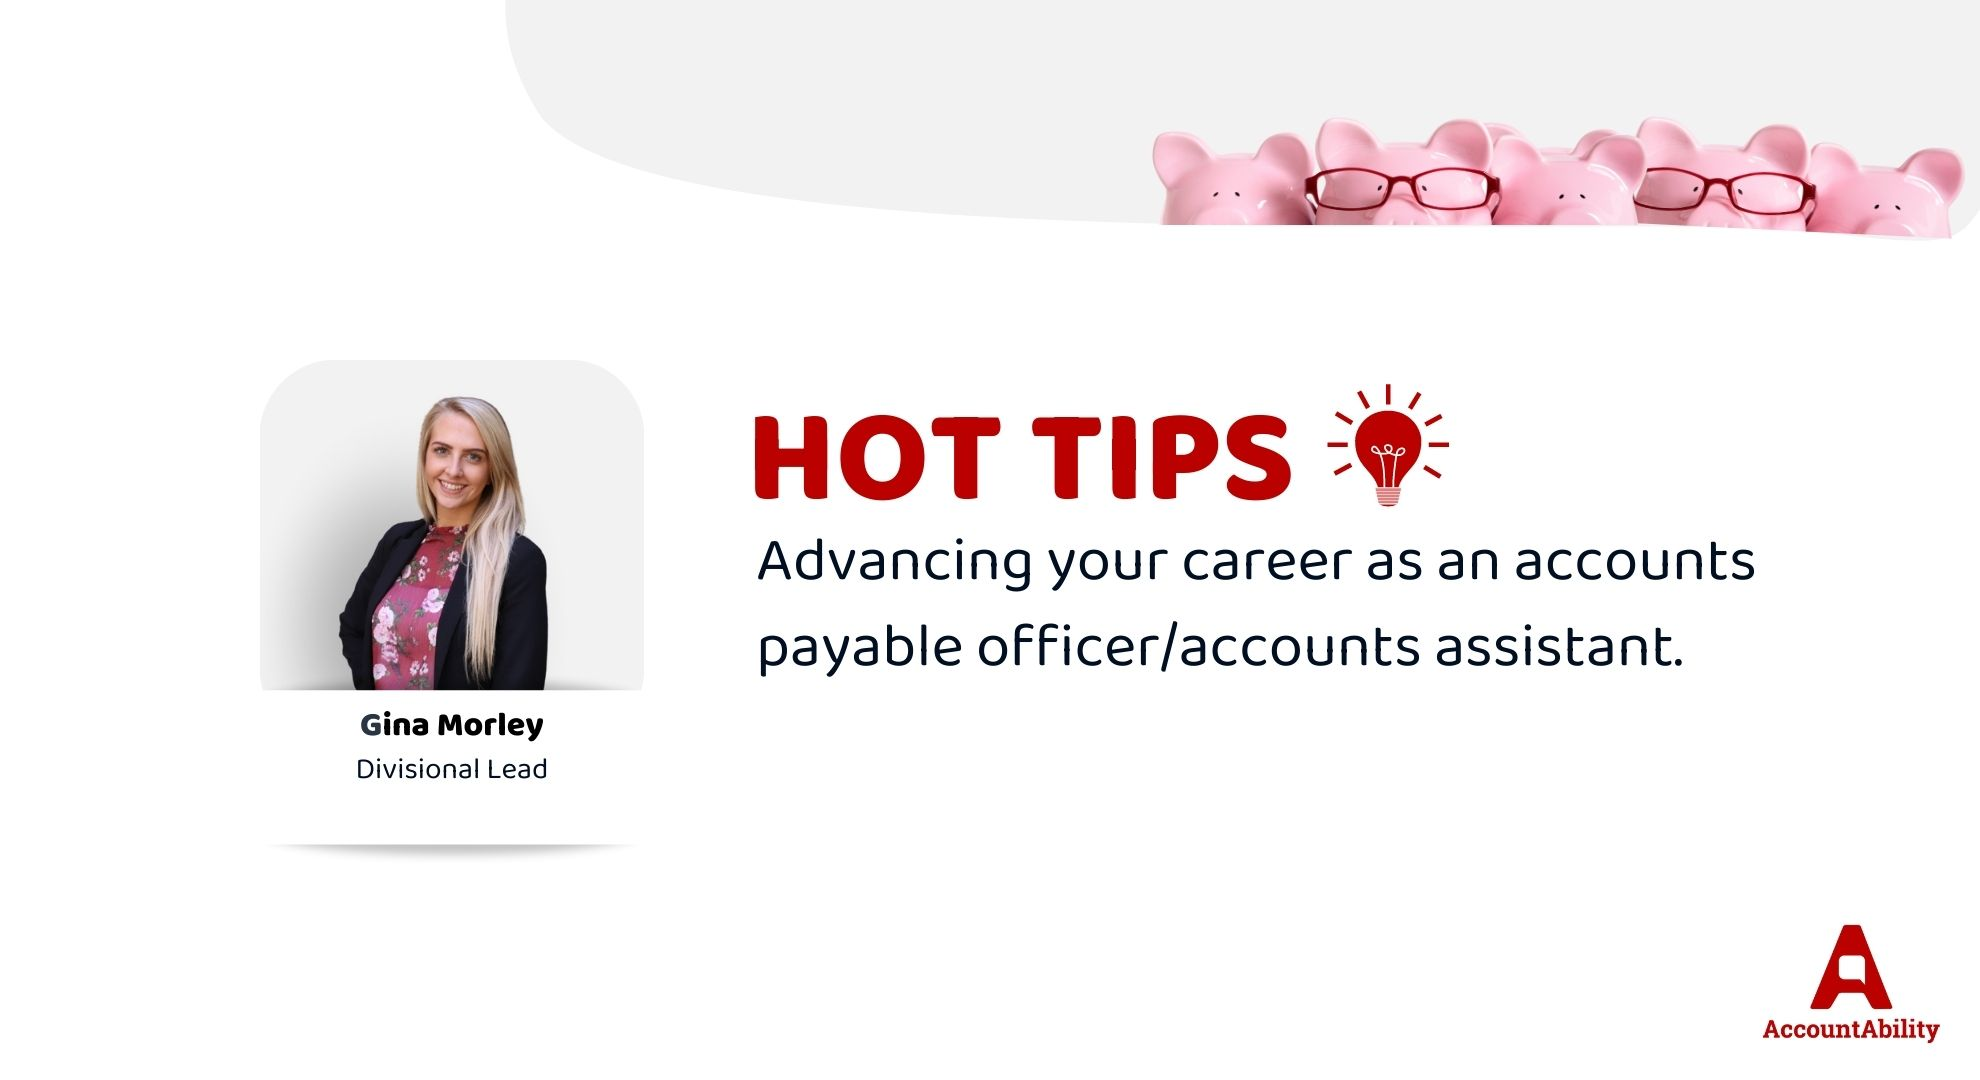 Advancing you career as an accounts payable officer/accounts assistant